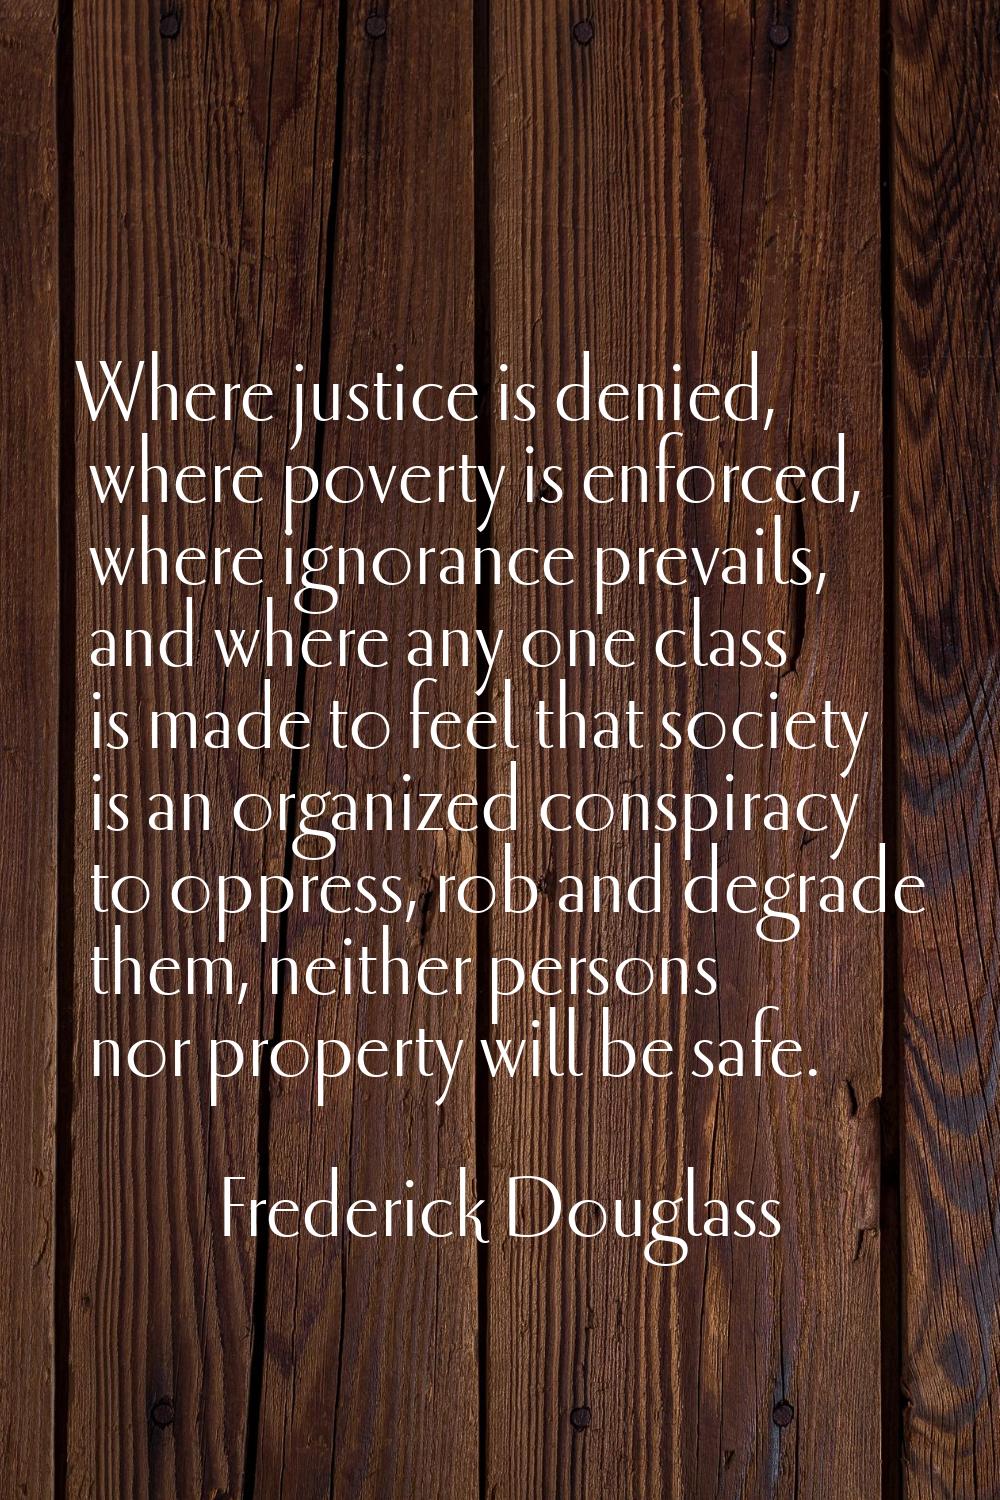 Where justice is denied, where poverty is enforced, where ignorance prevails, and where any one cla